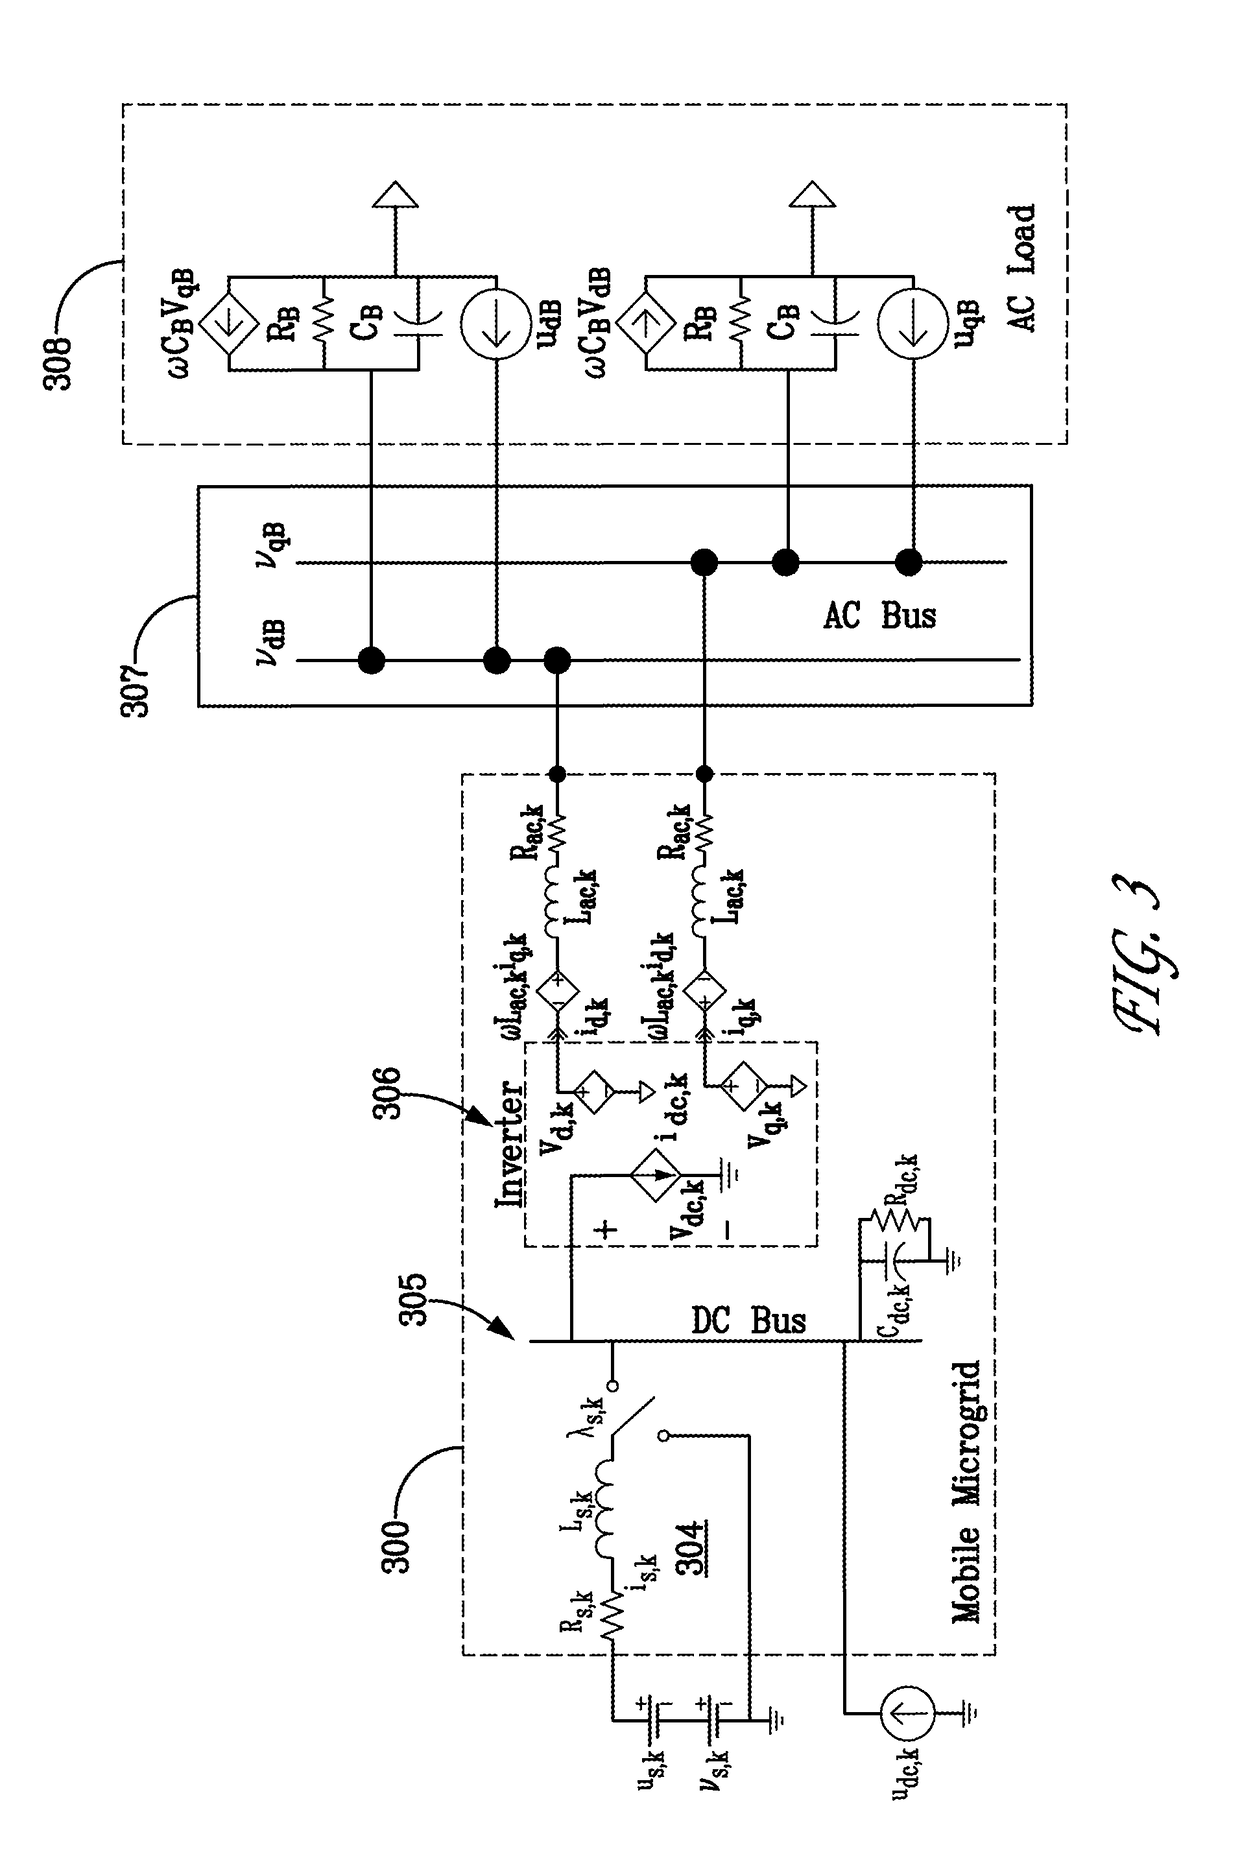 Nonlinear power flow control for networked AC/DC microgrids